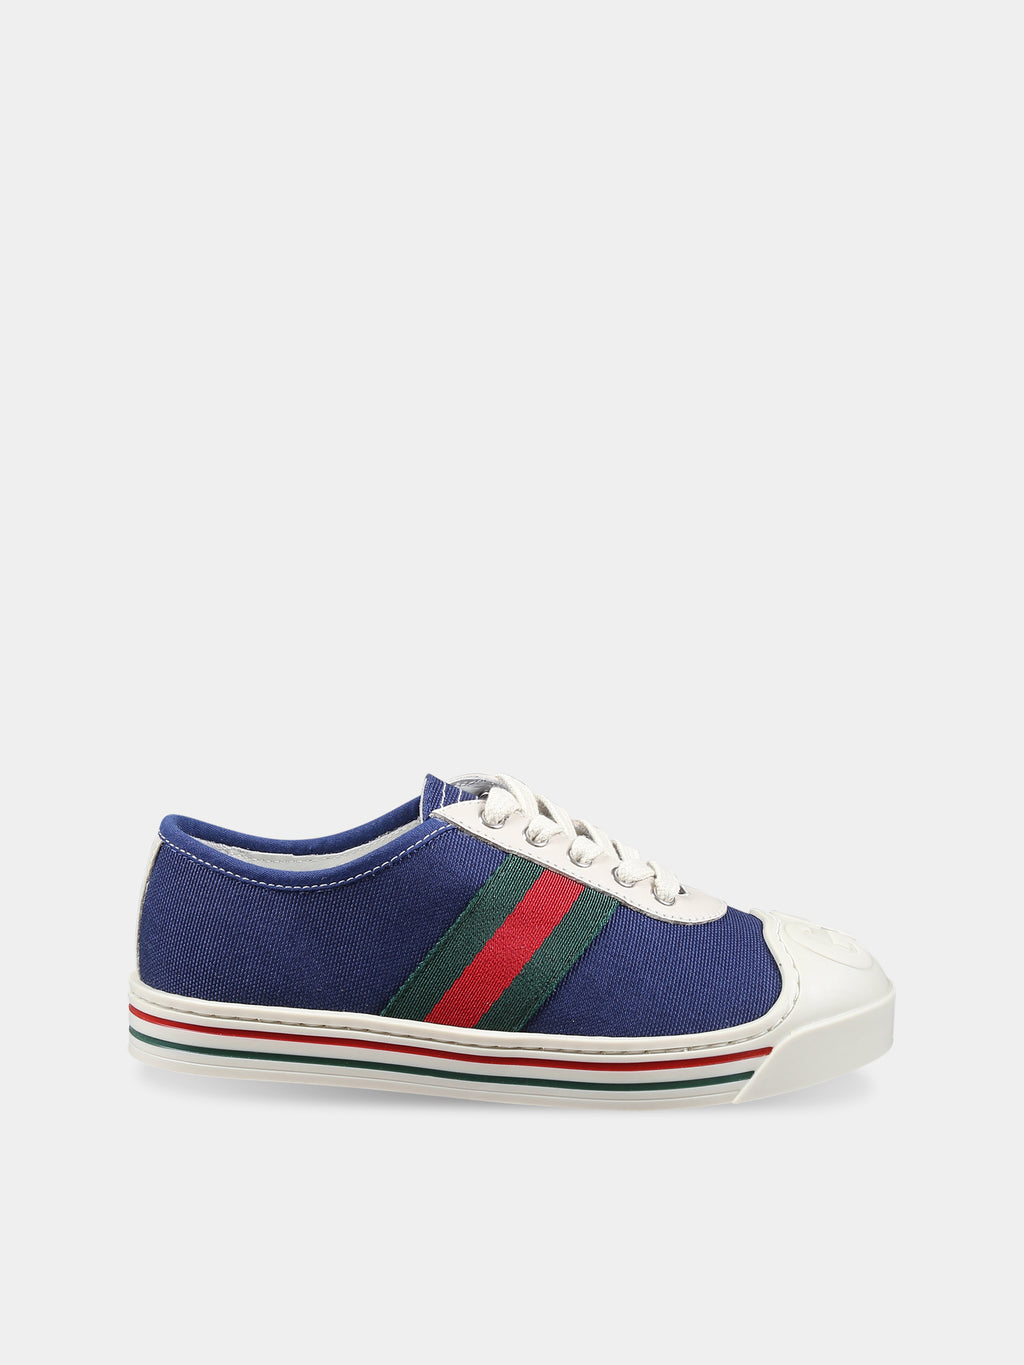 Blue canvas trainer for kids with green and red Web